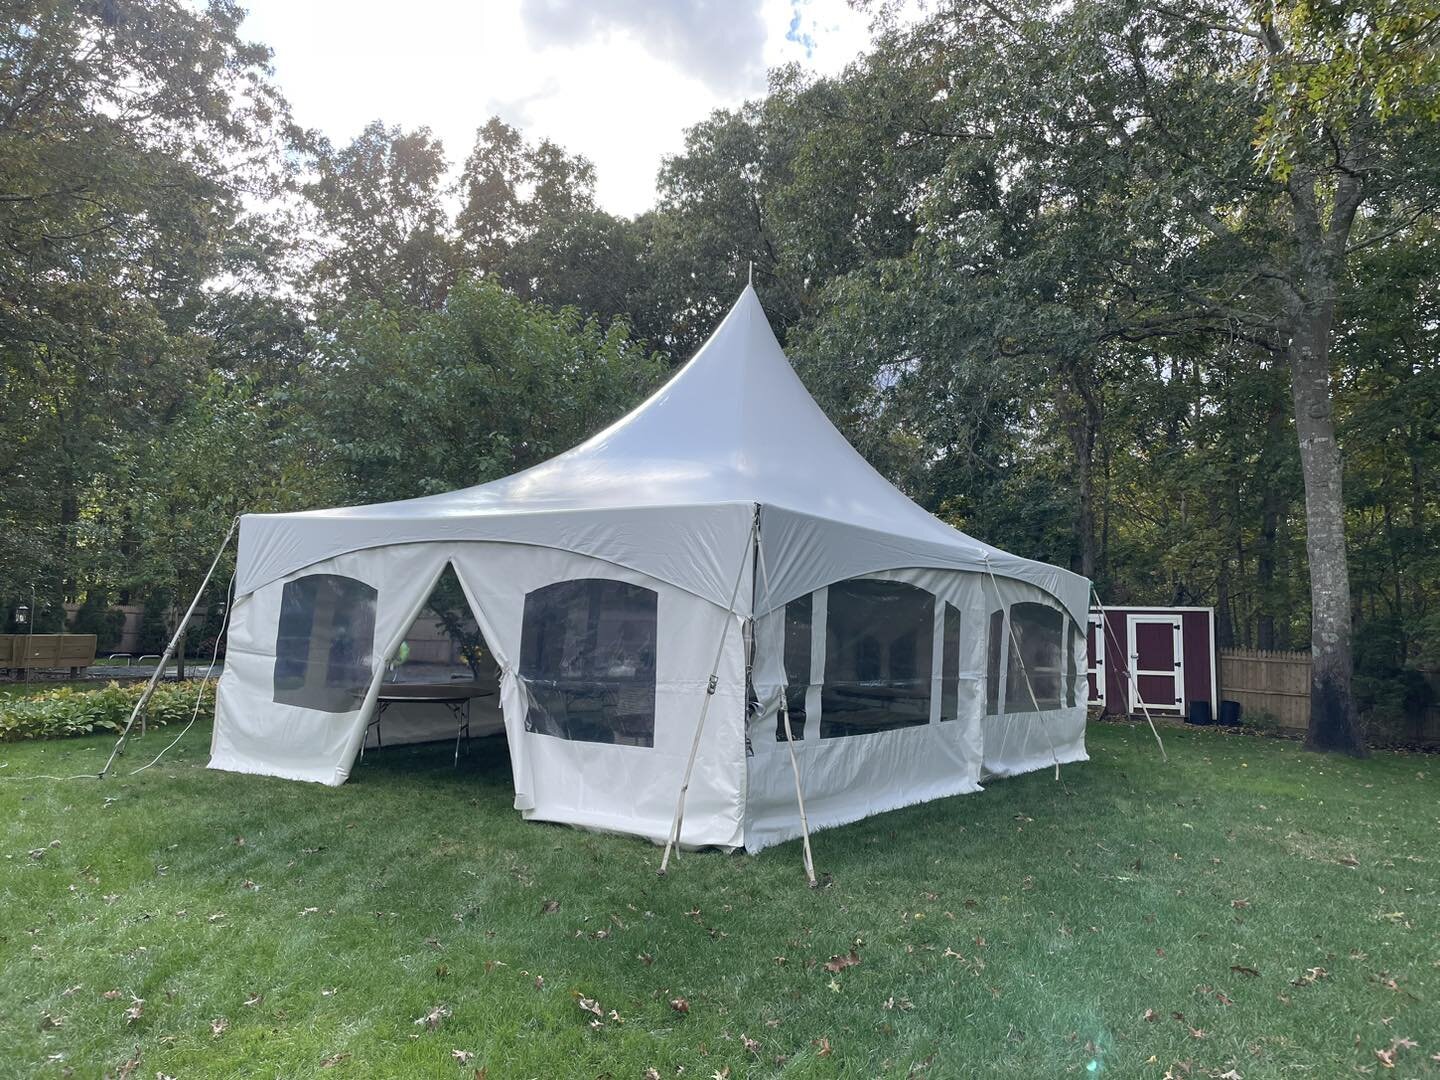 With the weather starting to get colder, we can add sidewalls and heaters to to our tents to keep your guests comfortable. Fall is still a great time to have your outdoor events and we can help make your event a success.